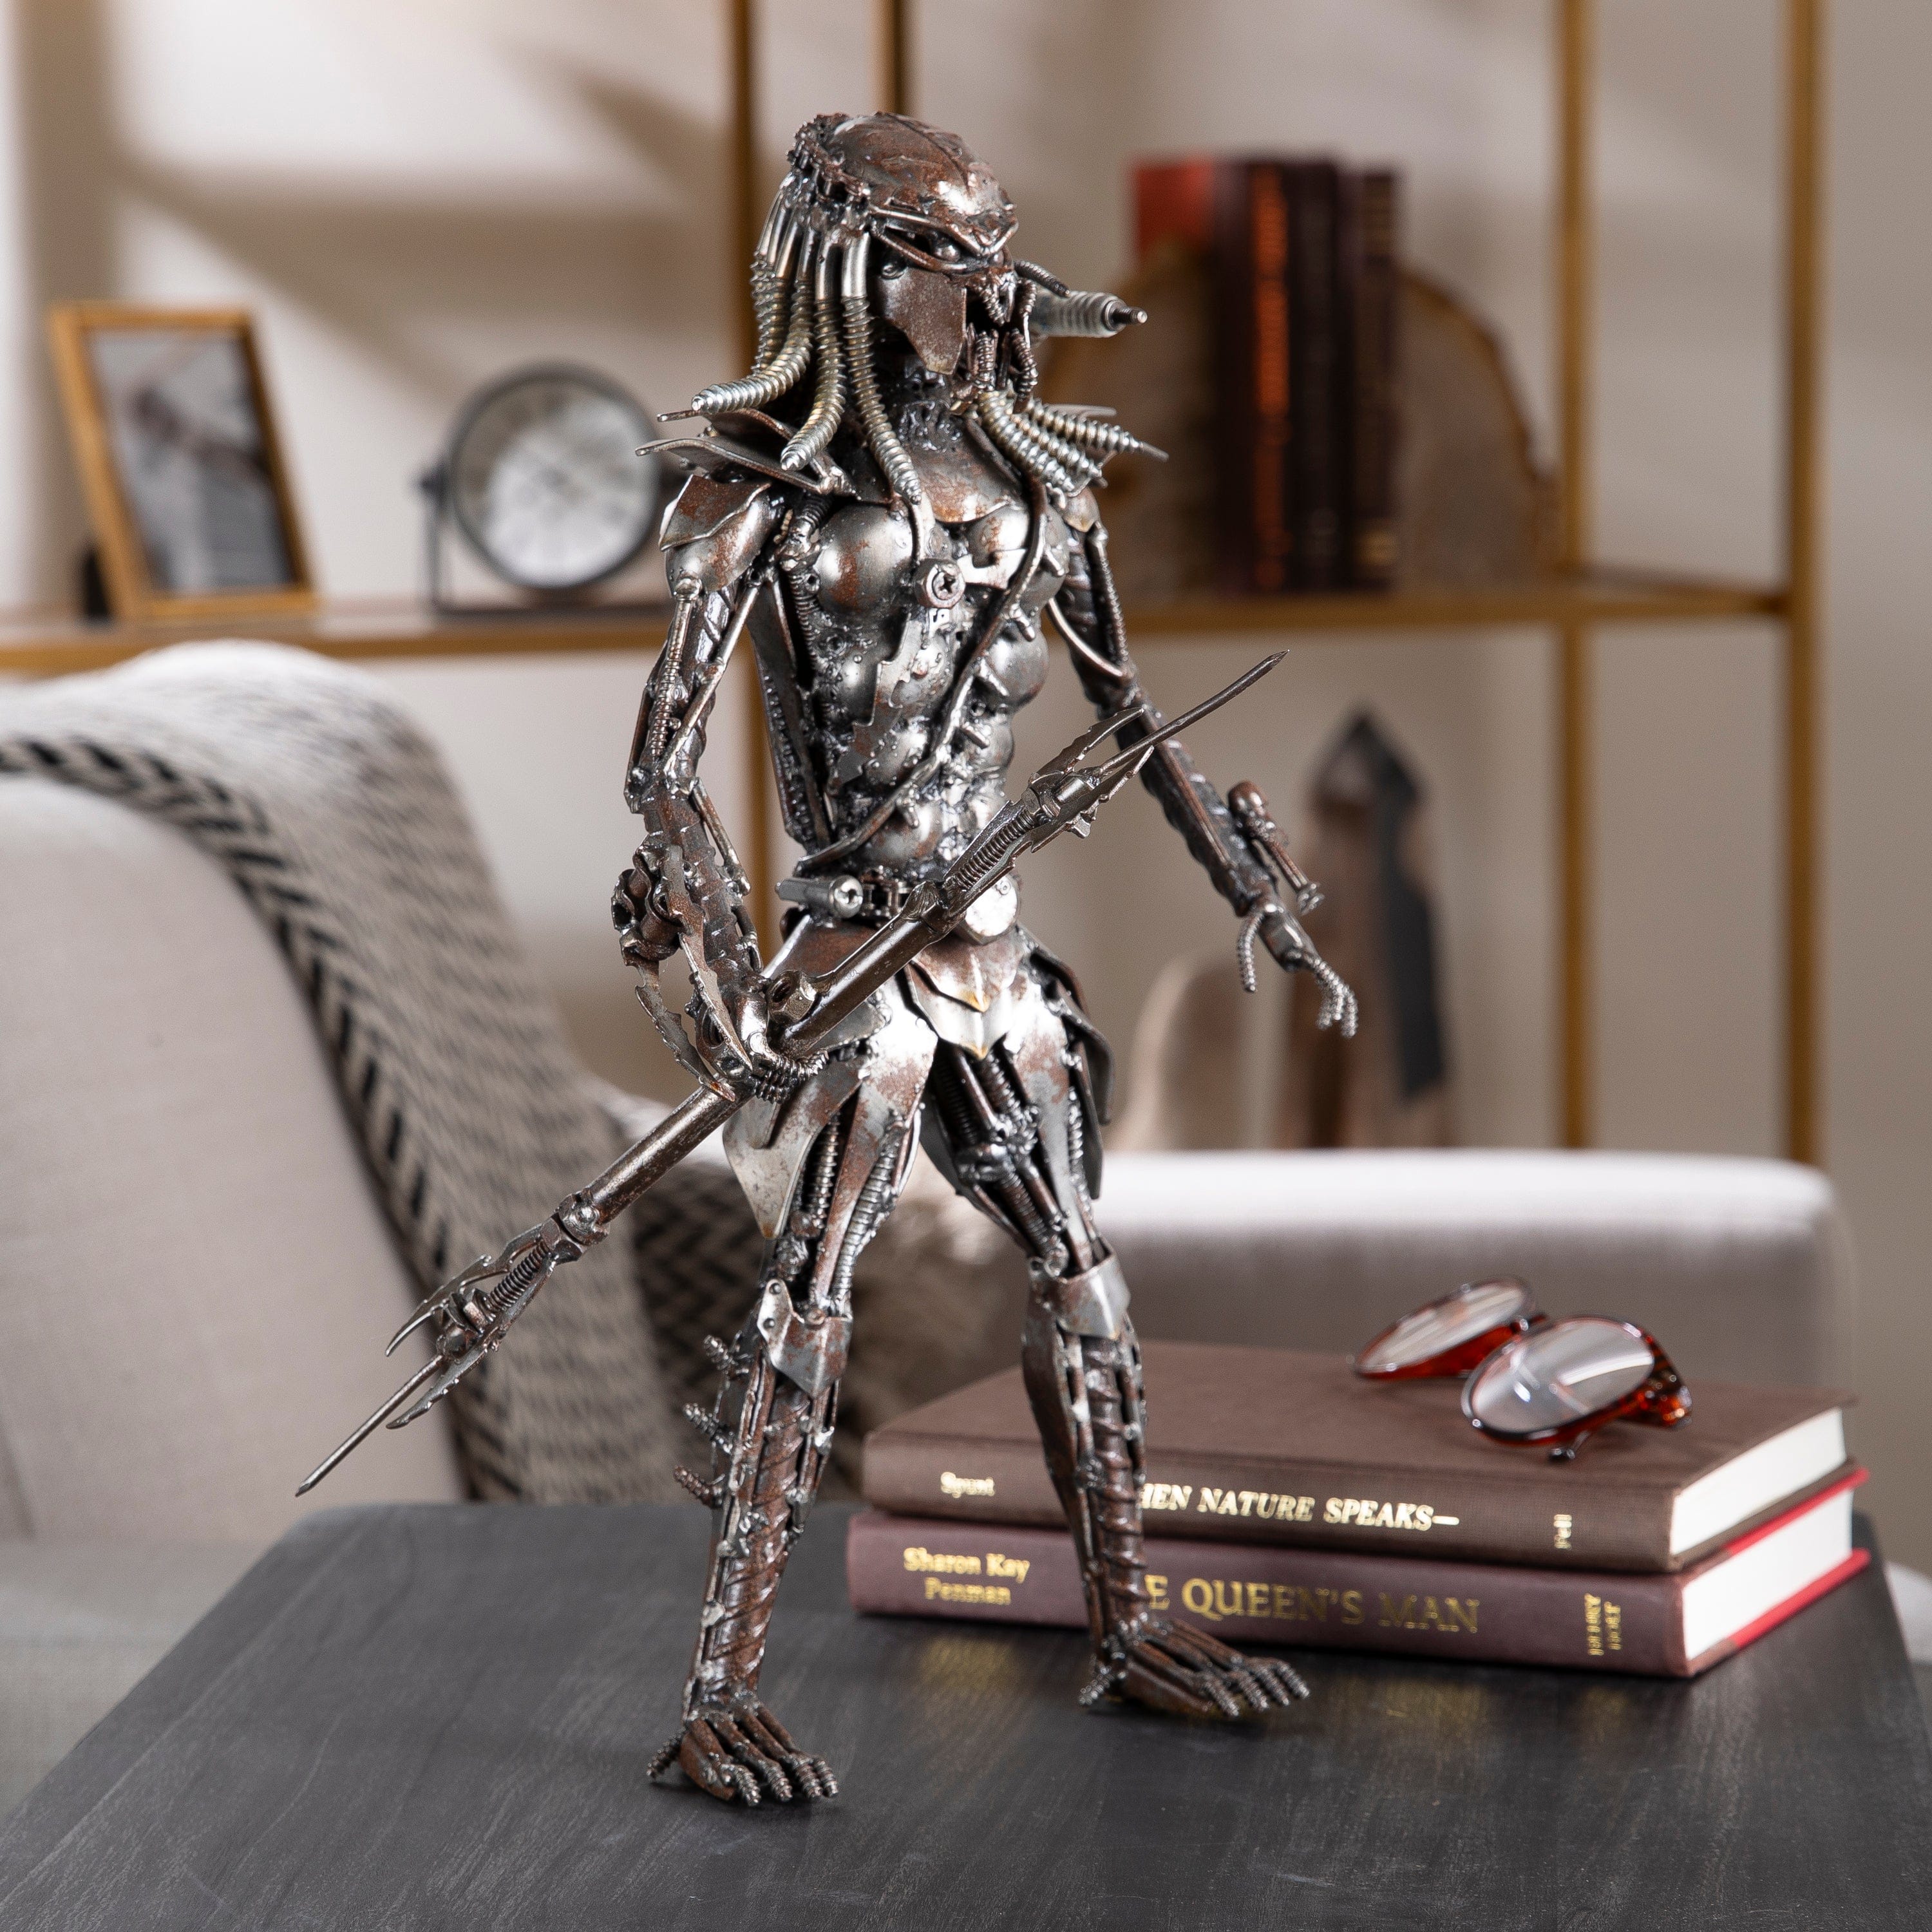 Kalifano Recycled Metal Art Predator Muscle Inspired Recycled Metal Sculpture RMS-1400PM-N